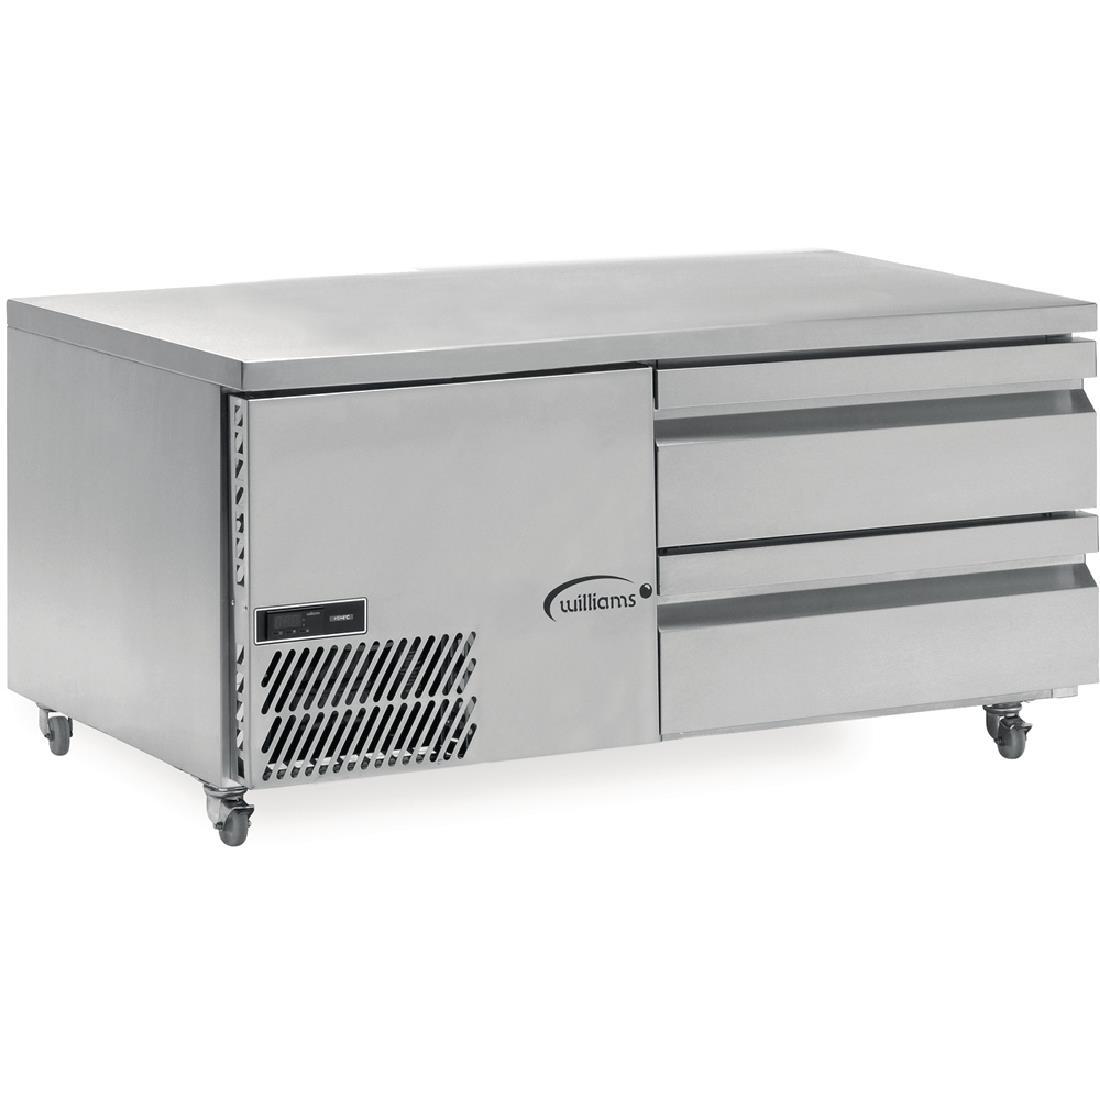 Williams 2 Drawer Underbroiler Counter UBC7 - G456  - 1